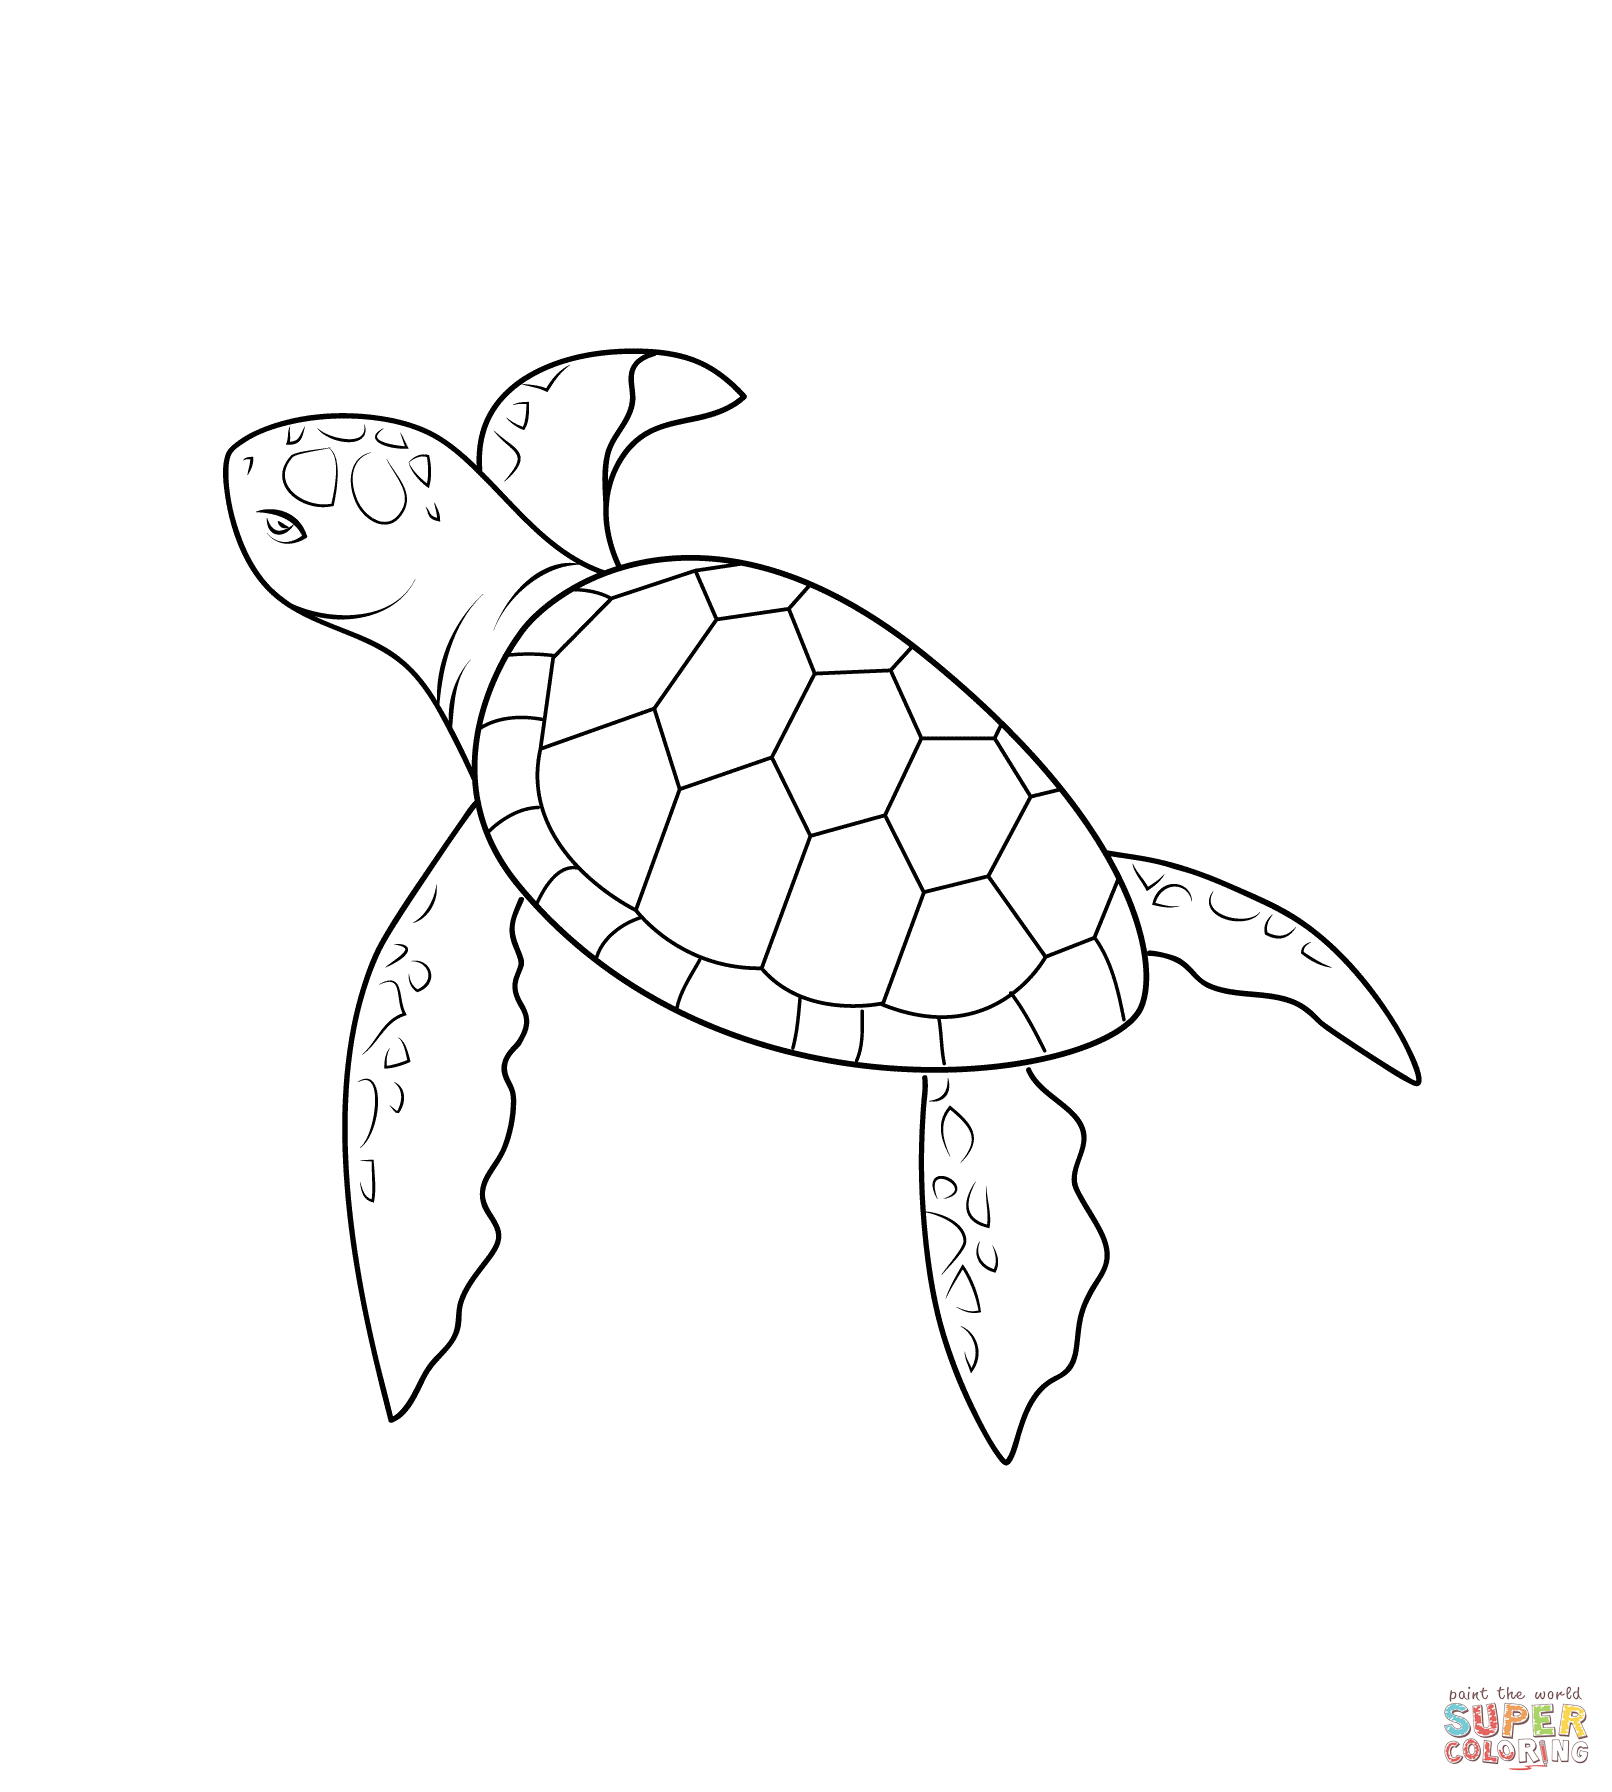 Baby Sea Turtles Coloring Pages - Coloring Home